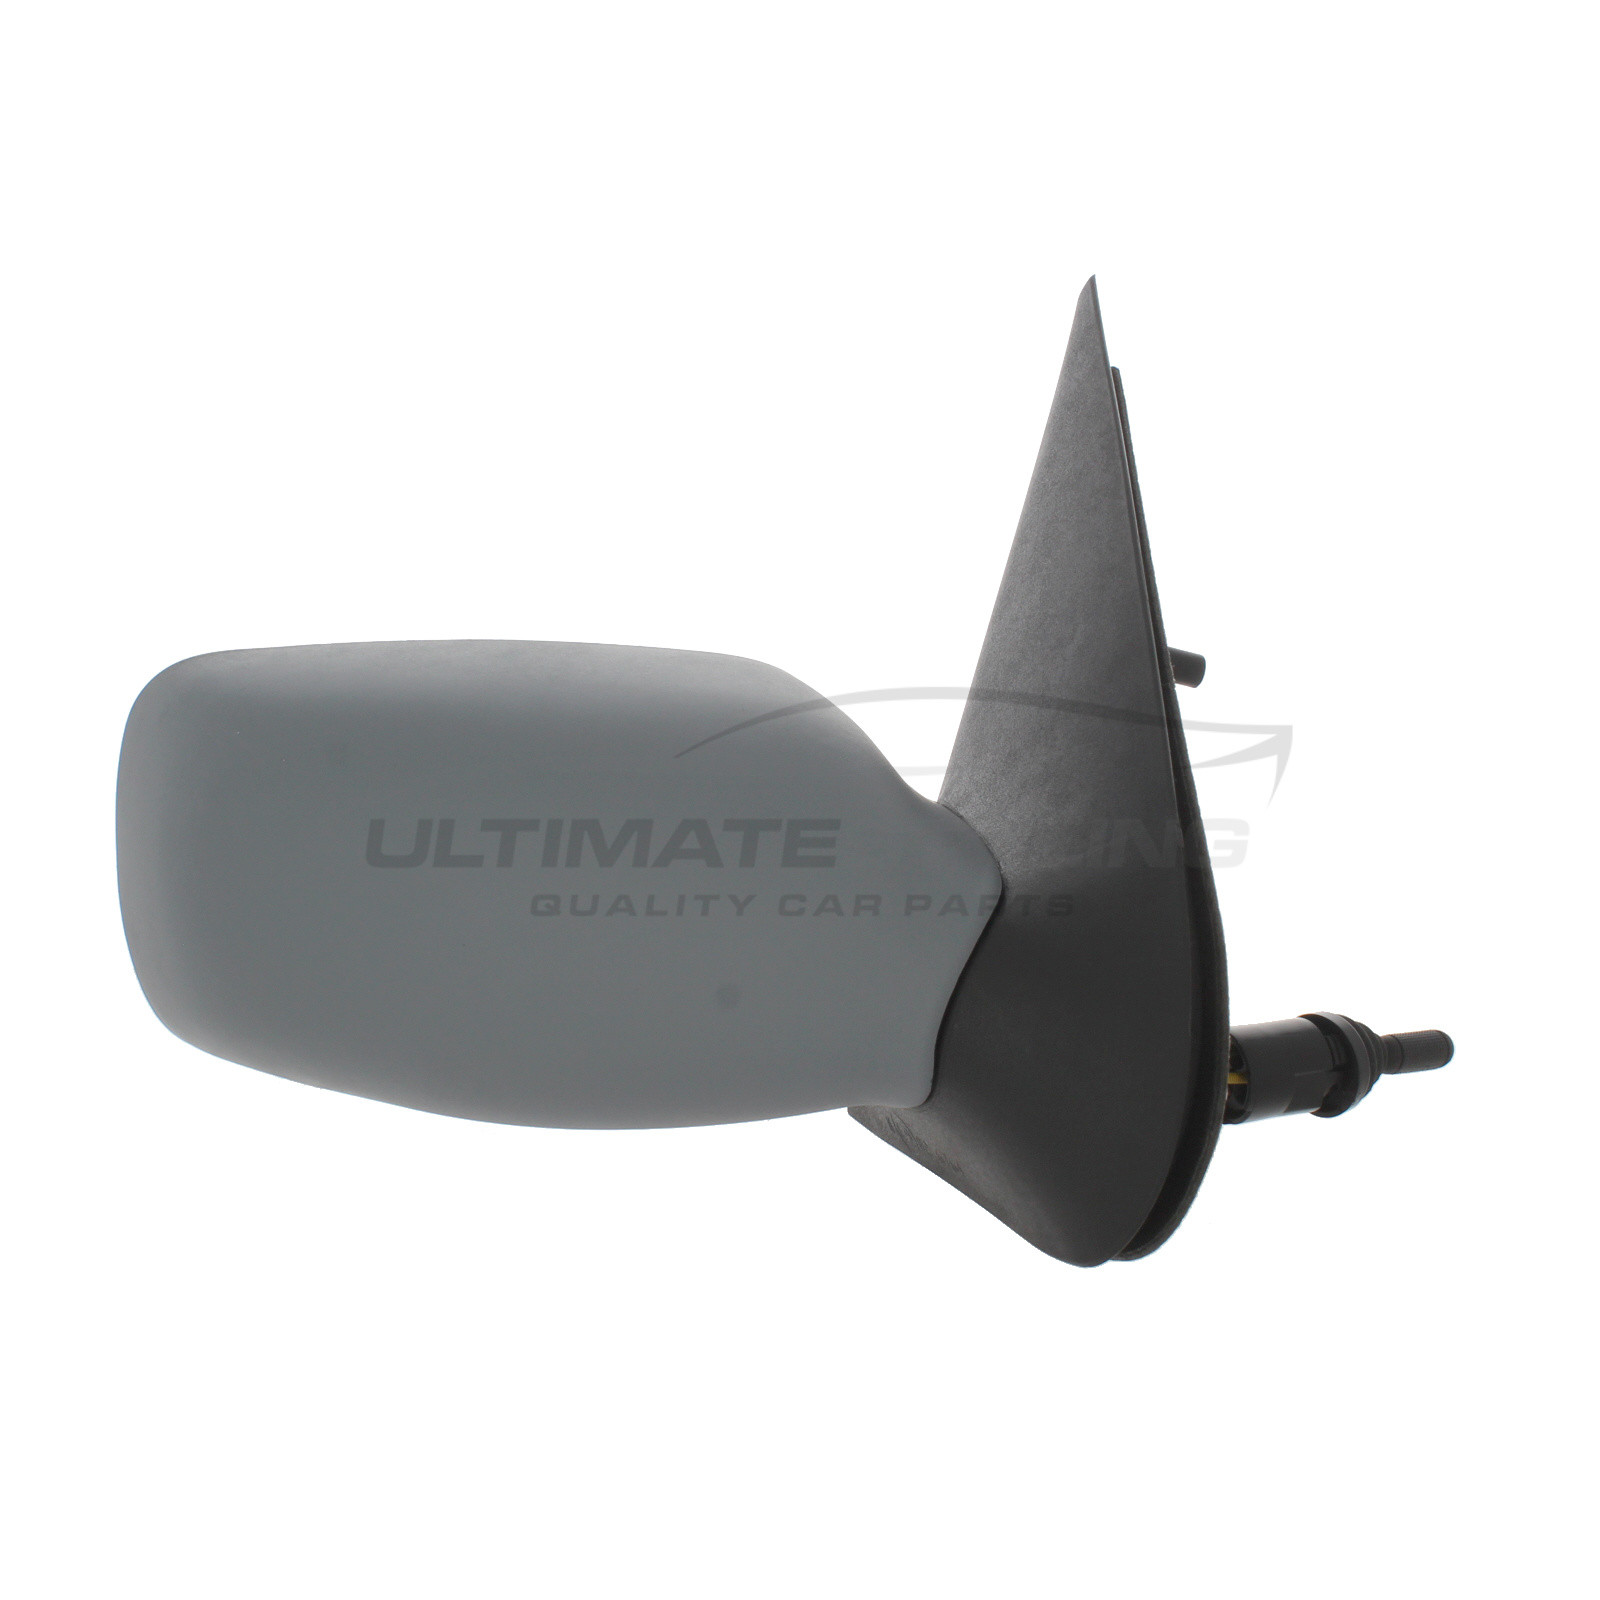 Ford Fiesta, Mazda 121 Wing Mirror / Door Mirror - Drivers Side (RH) - Cable adjustment - Non-Heated Glass - Primed